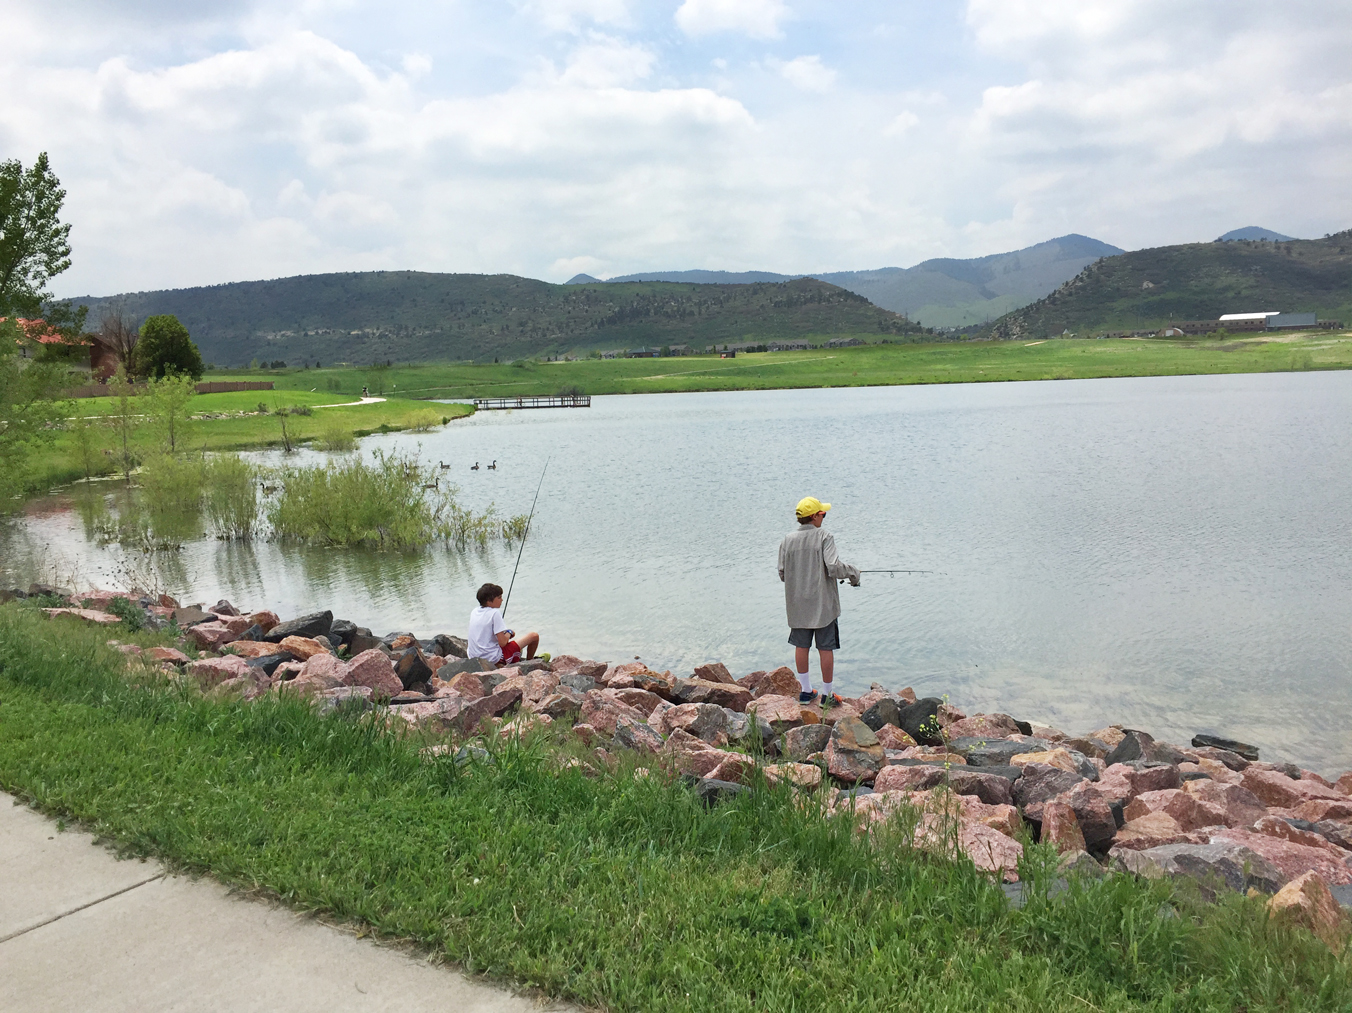 Two boys fishing at Hine Lake in Easton Regional Park.